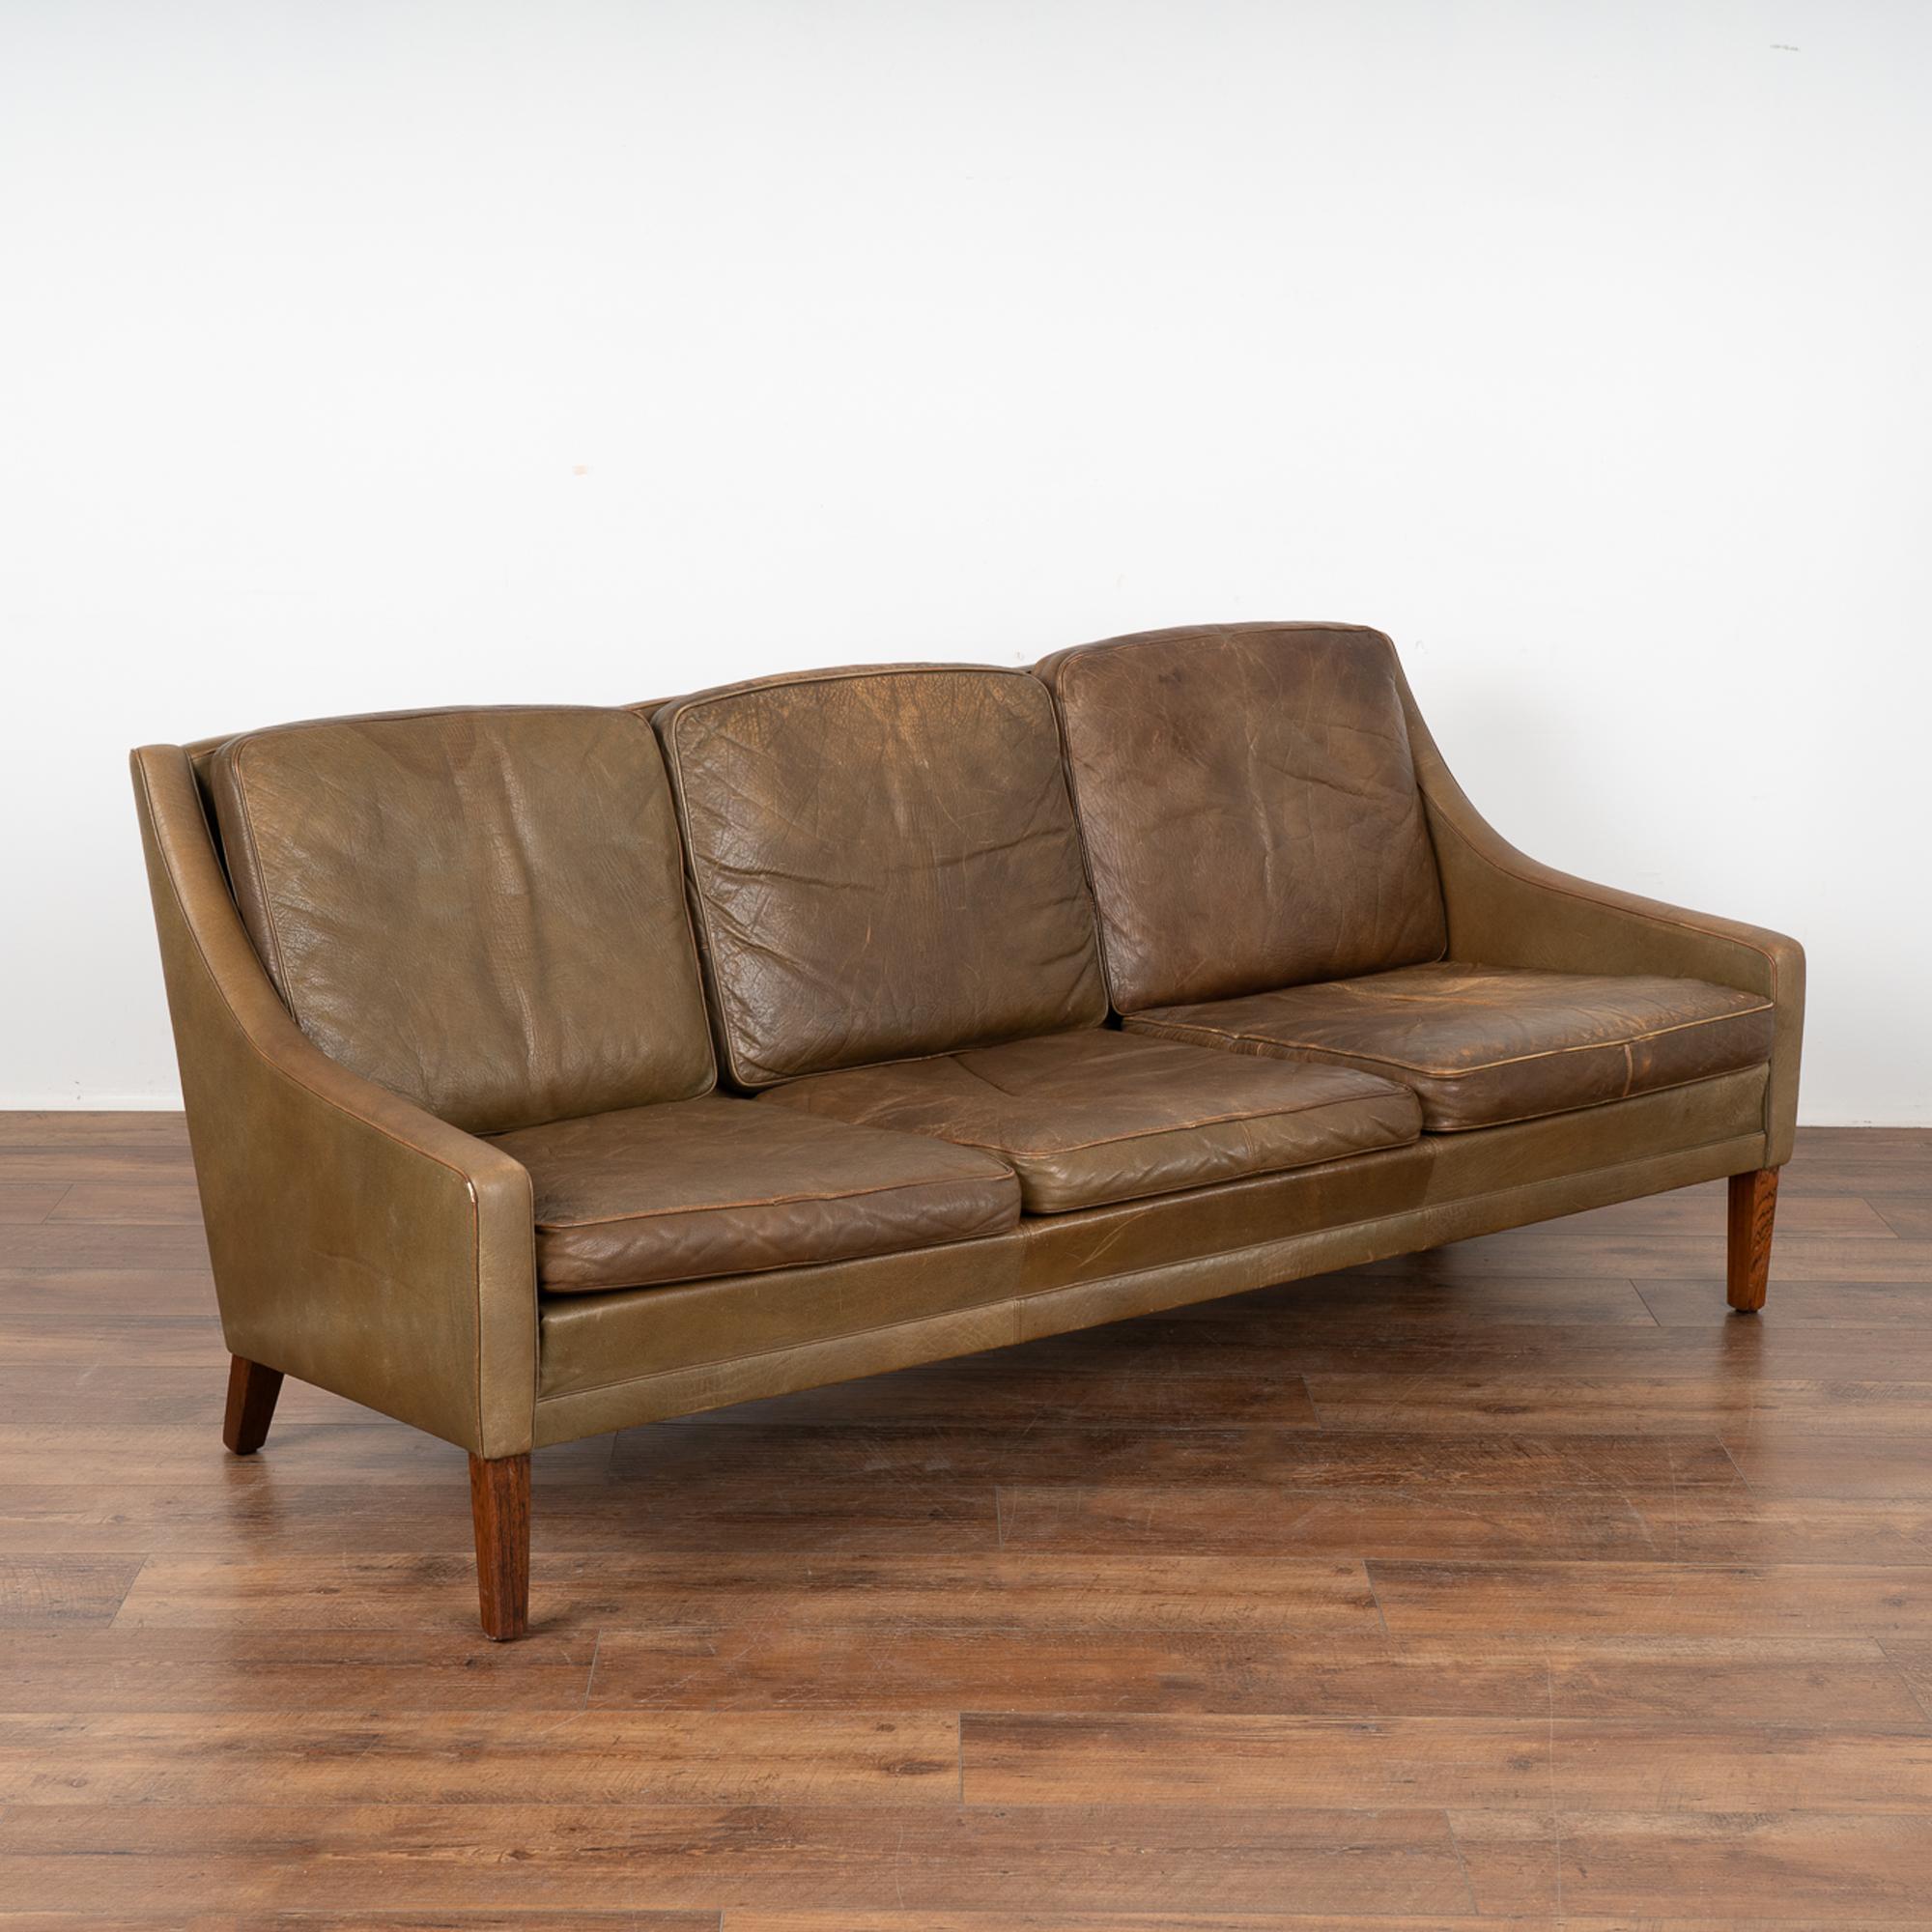 Mid-century modern brown leather three-seat sofa with removable cushions and hard wood frame.
The years of use are revealed in the aged patina of the leather, including impressions, scuffs/scratches, some discoloration, stains on seat cushions,